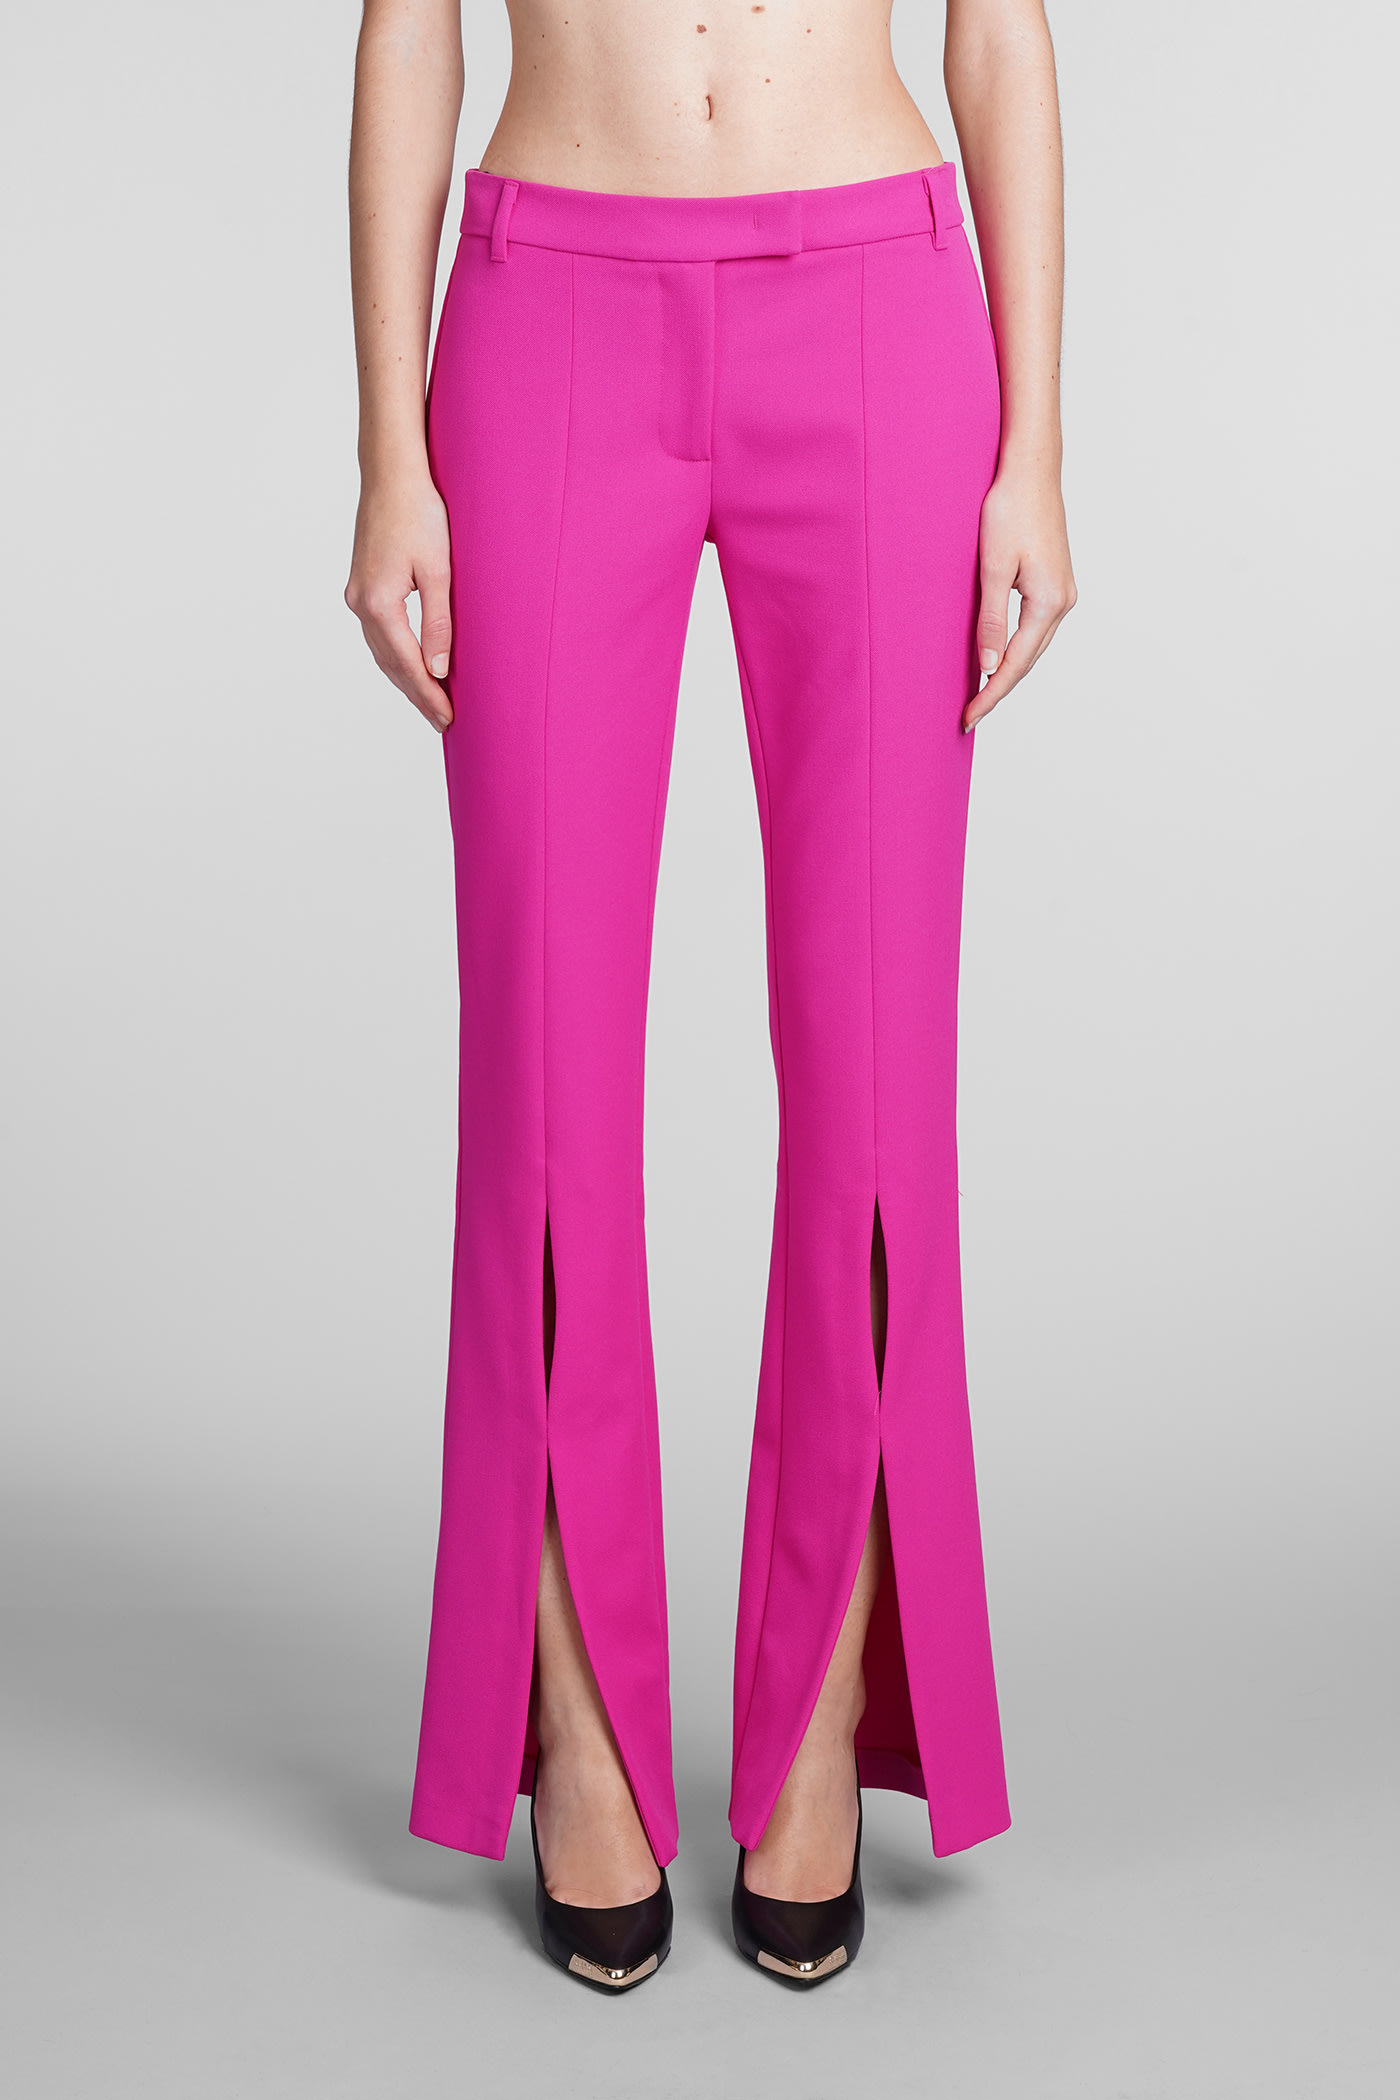 VERSACE JEANS COUTURE PANTS IN ROSE-PINK POLYESTER